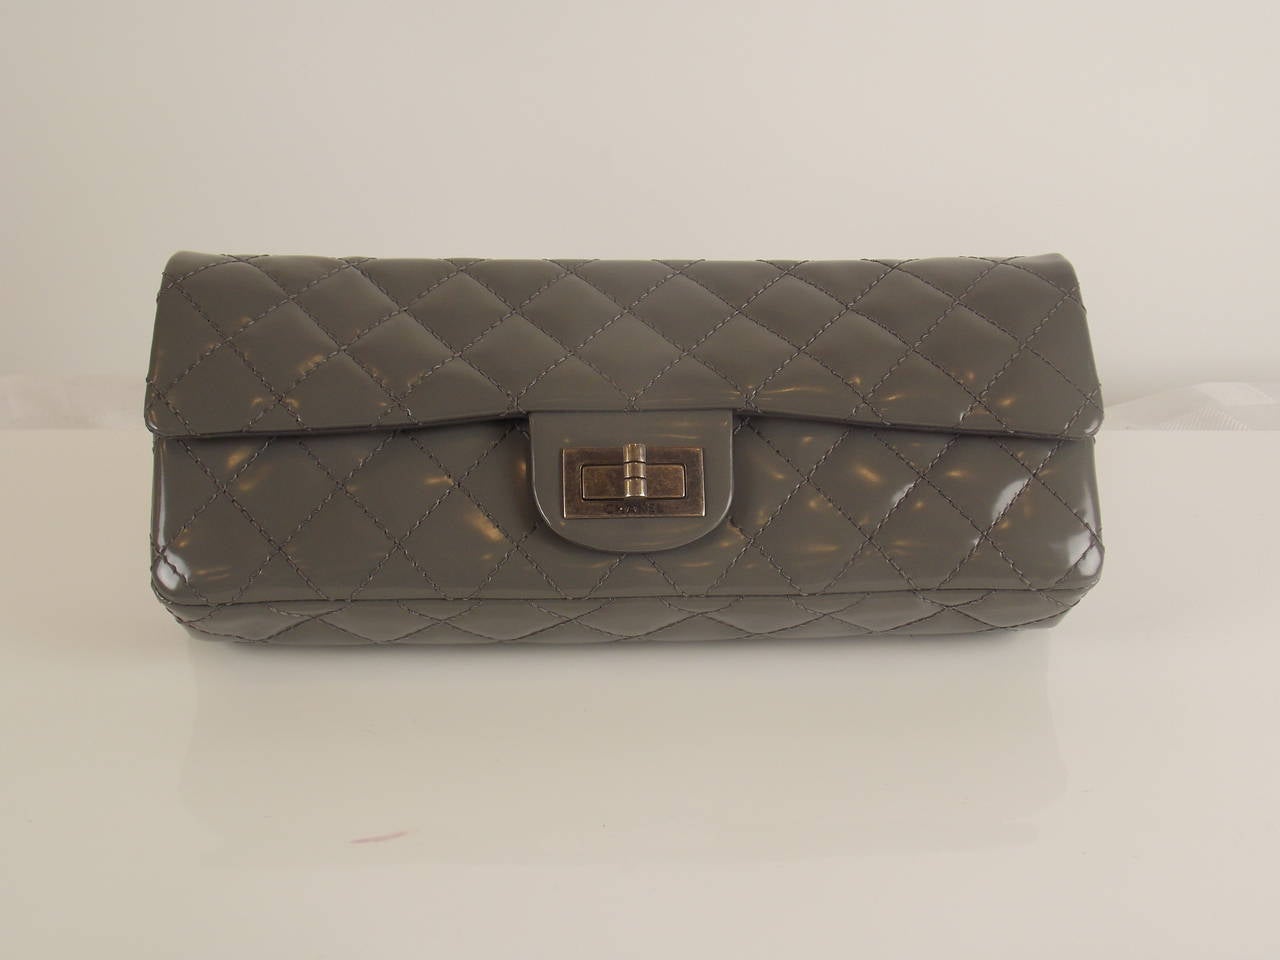 This unique Chanel grey clutch is a sample produced for the runway.  The clutch features a turn-lock closure, a chain strap, two inner pockets, a mirror and glossy patent leather quilted in signature Chanel diamond stitched pattern.  